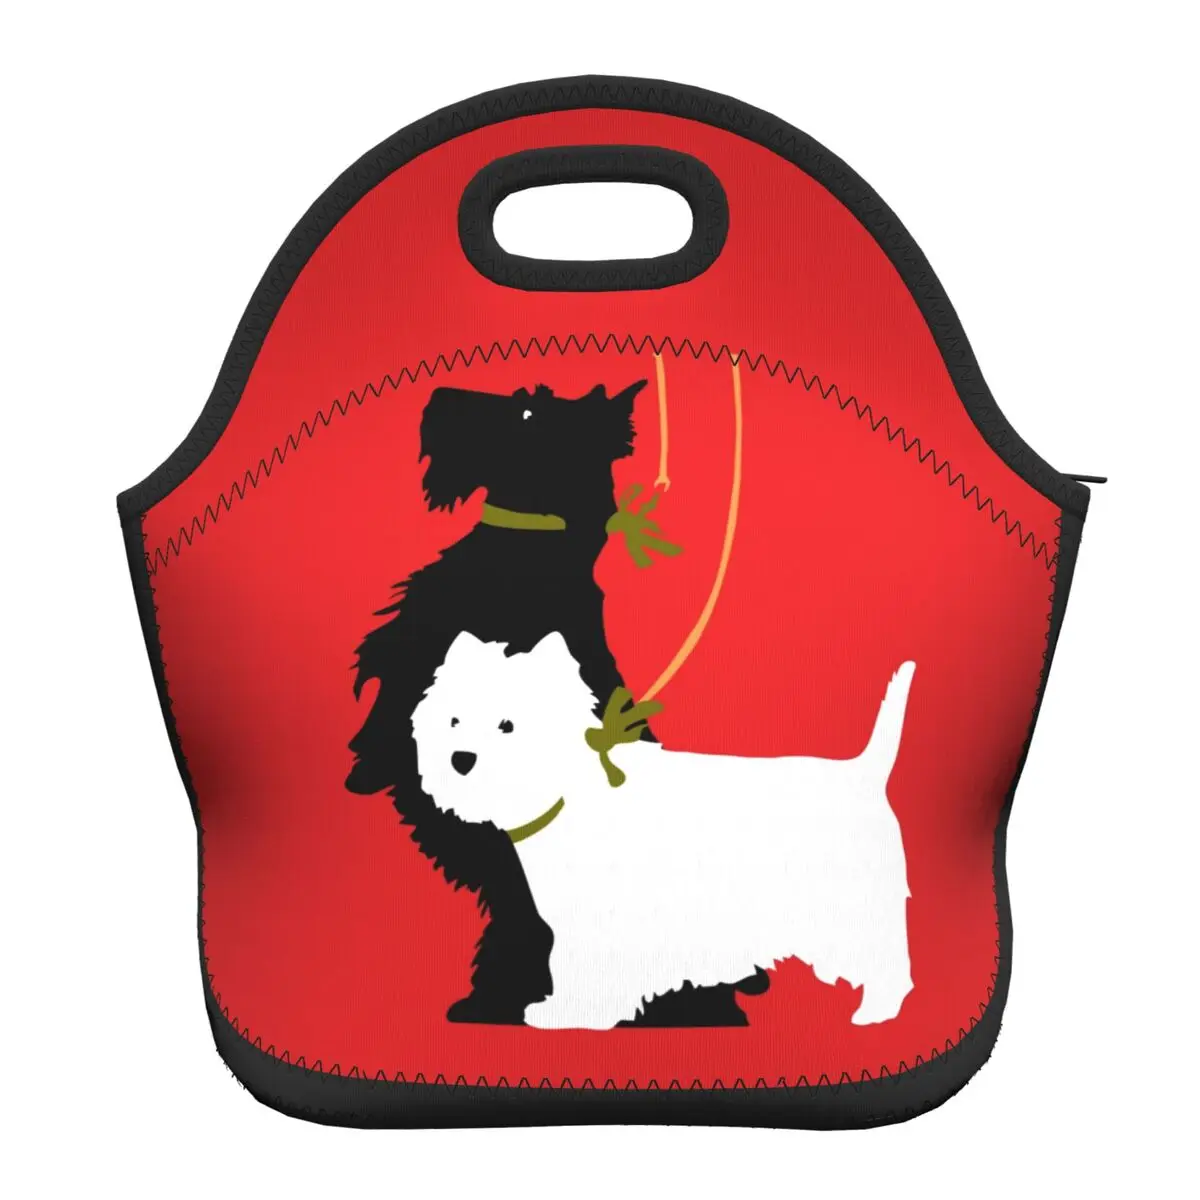 

West Highland White Terrier And Scottie Insulated Lunch Bag Women Scottish Terrier Dog Thermal Cooler Neoprene Food Lunch Box